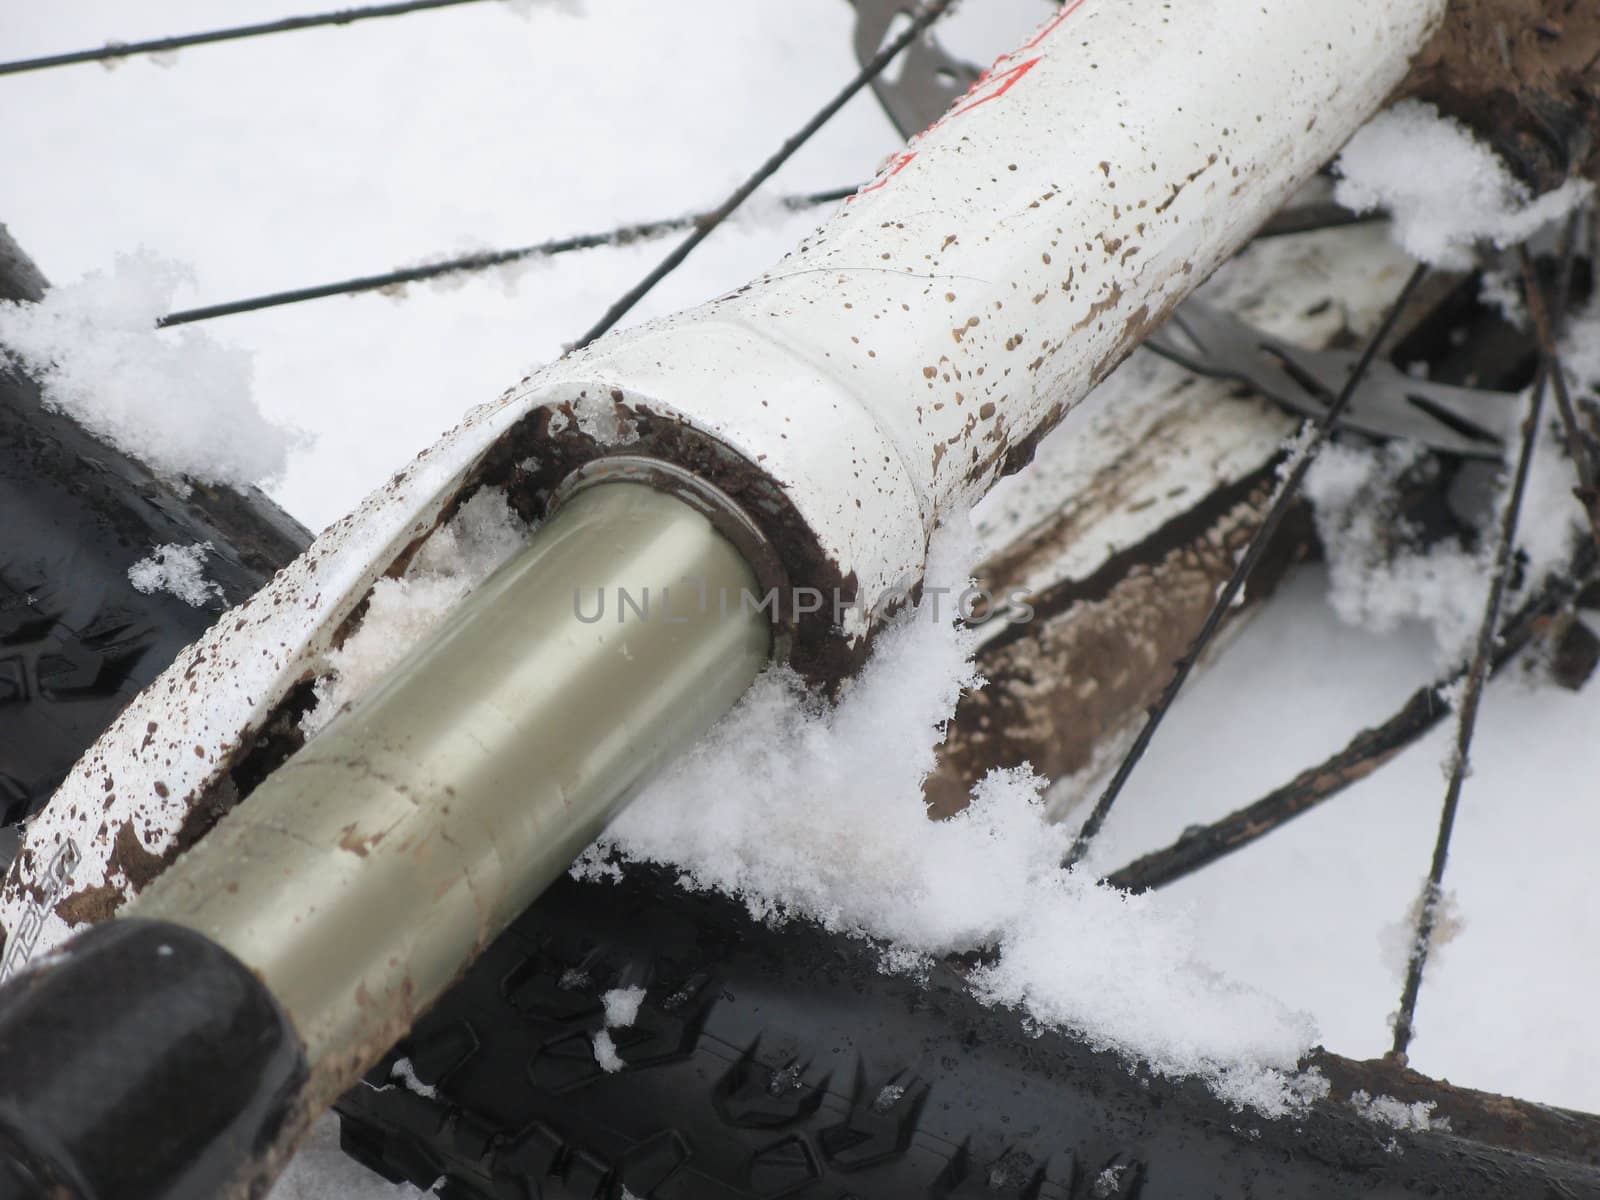 Mountain bike forks covered in mud and snow